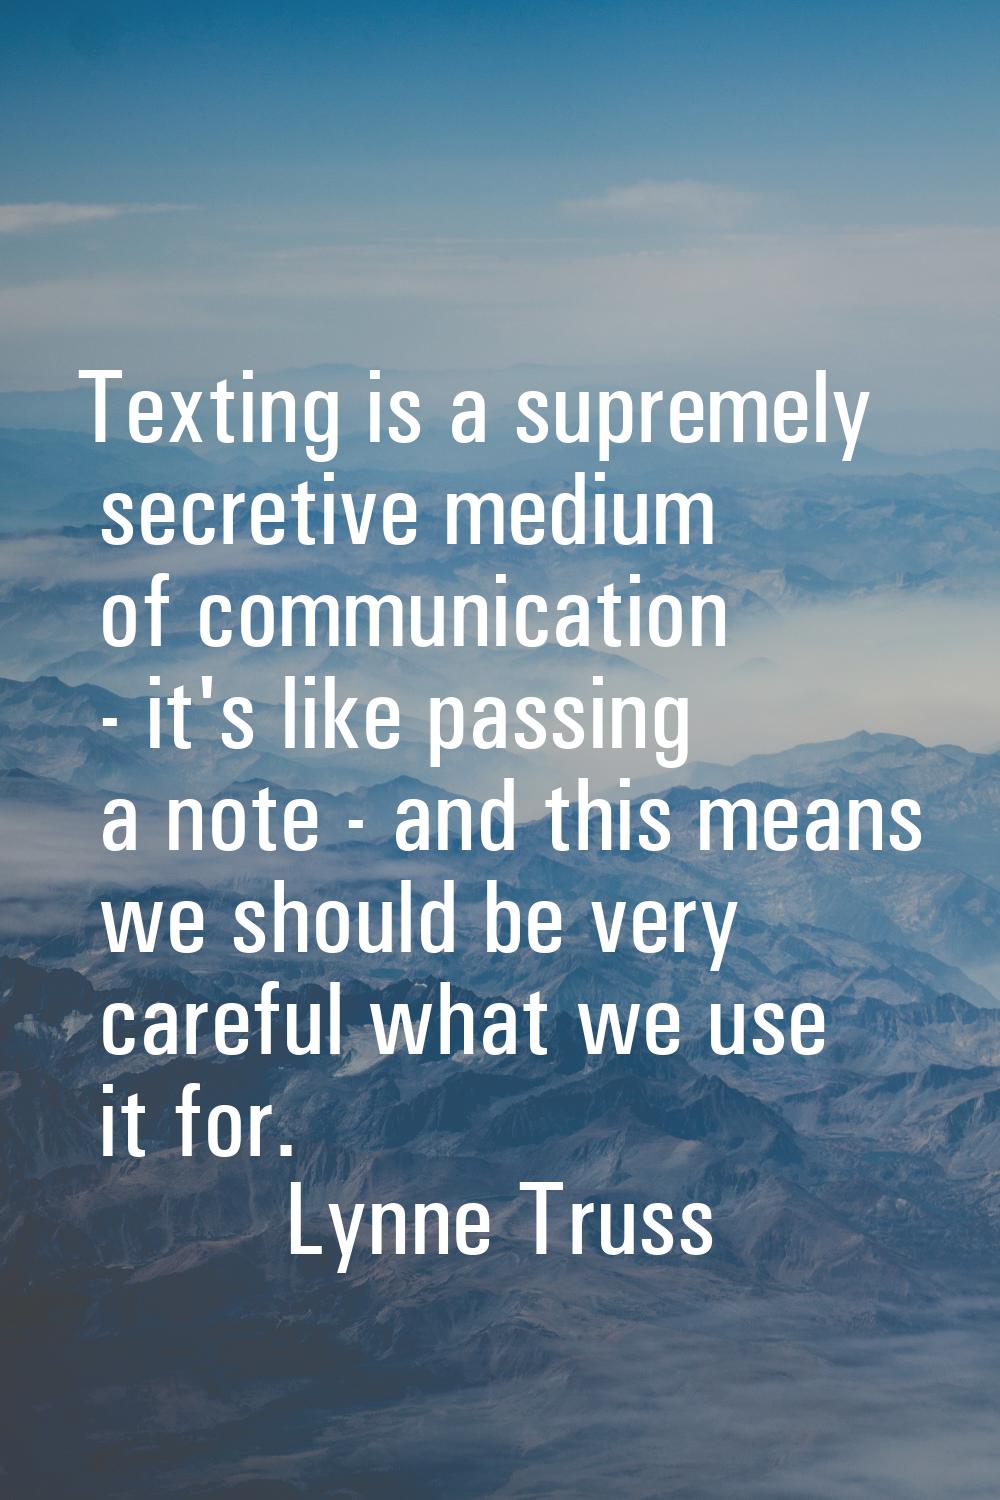 Texting is a supremely secretive medium of communication - it's like passing a note - and this mean